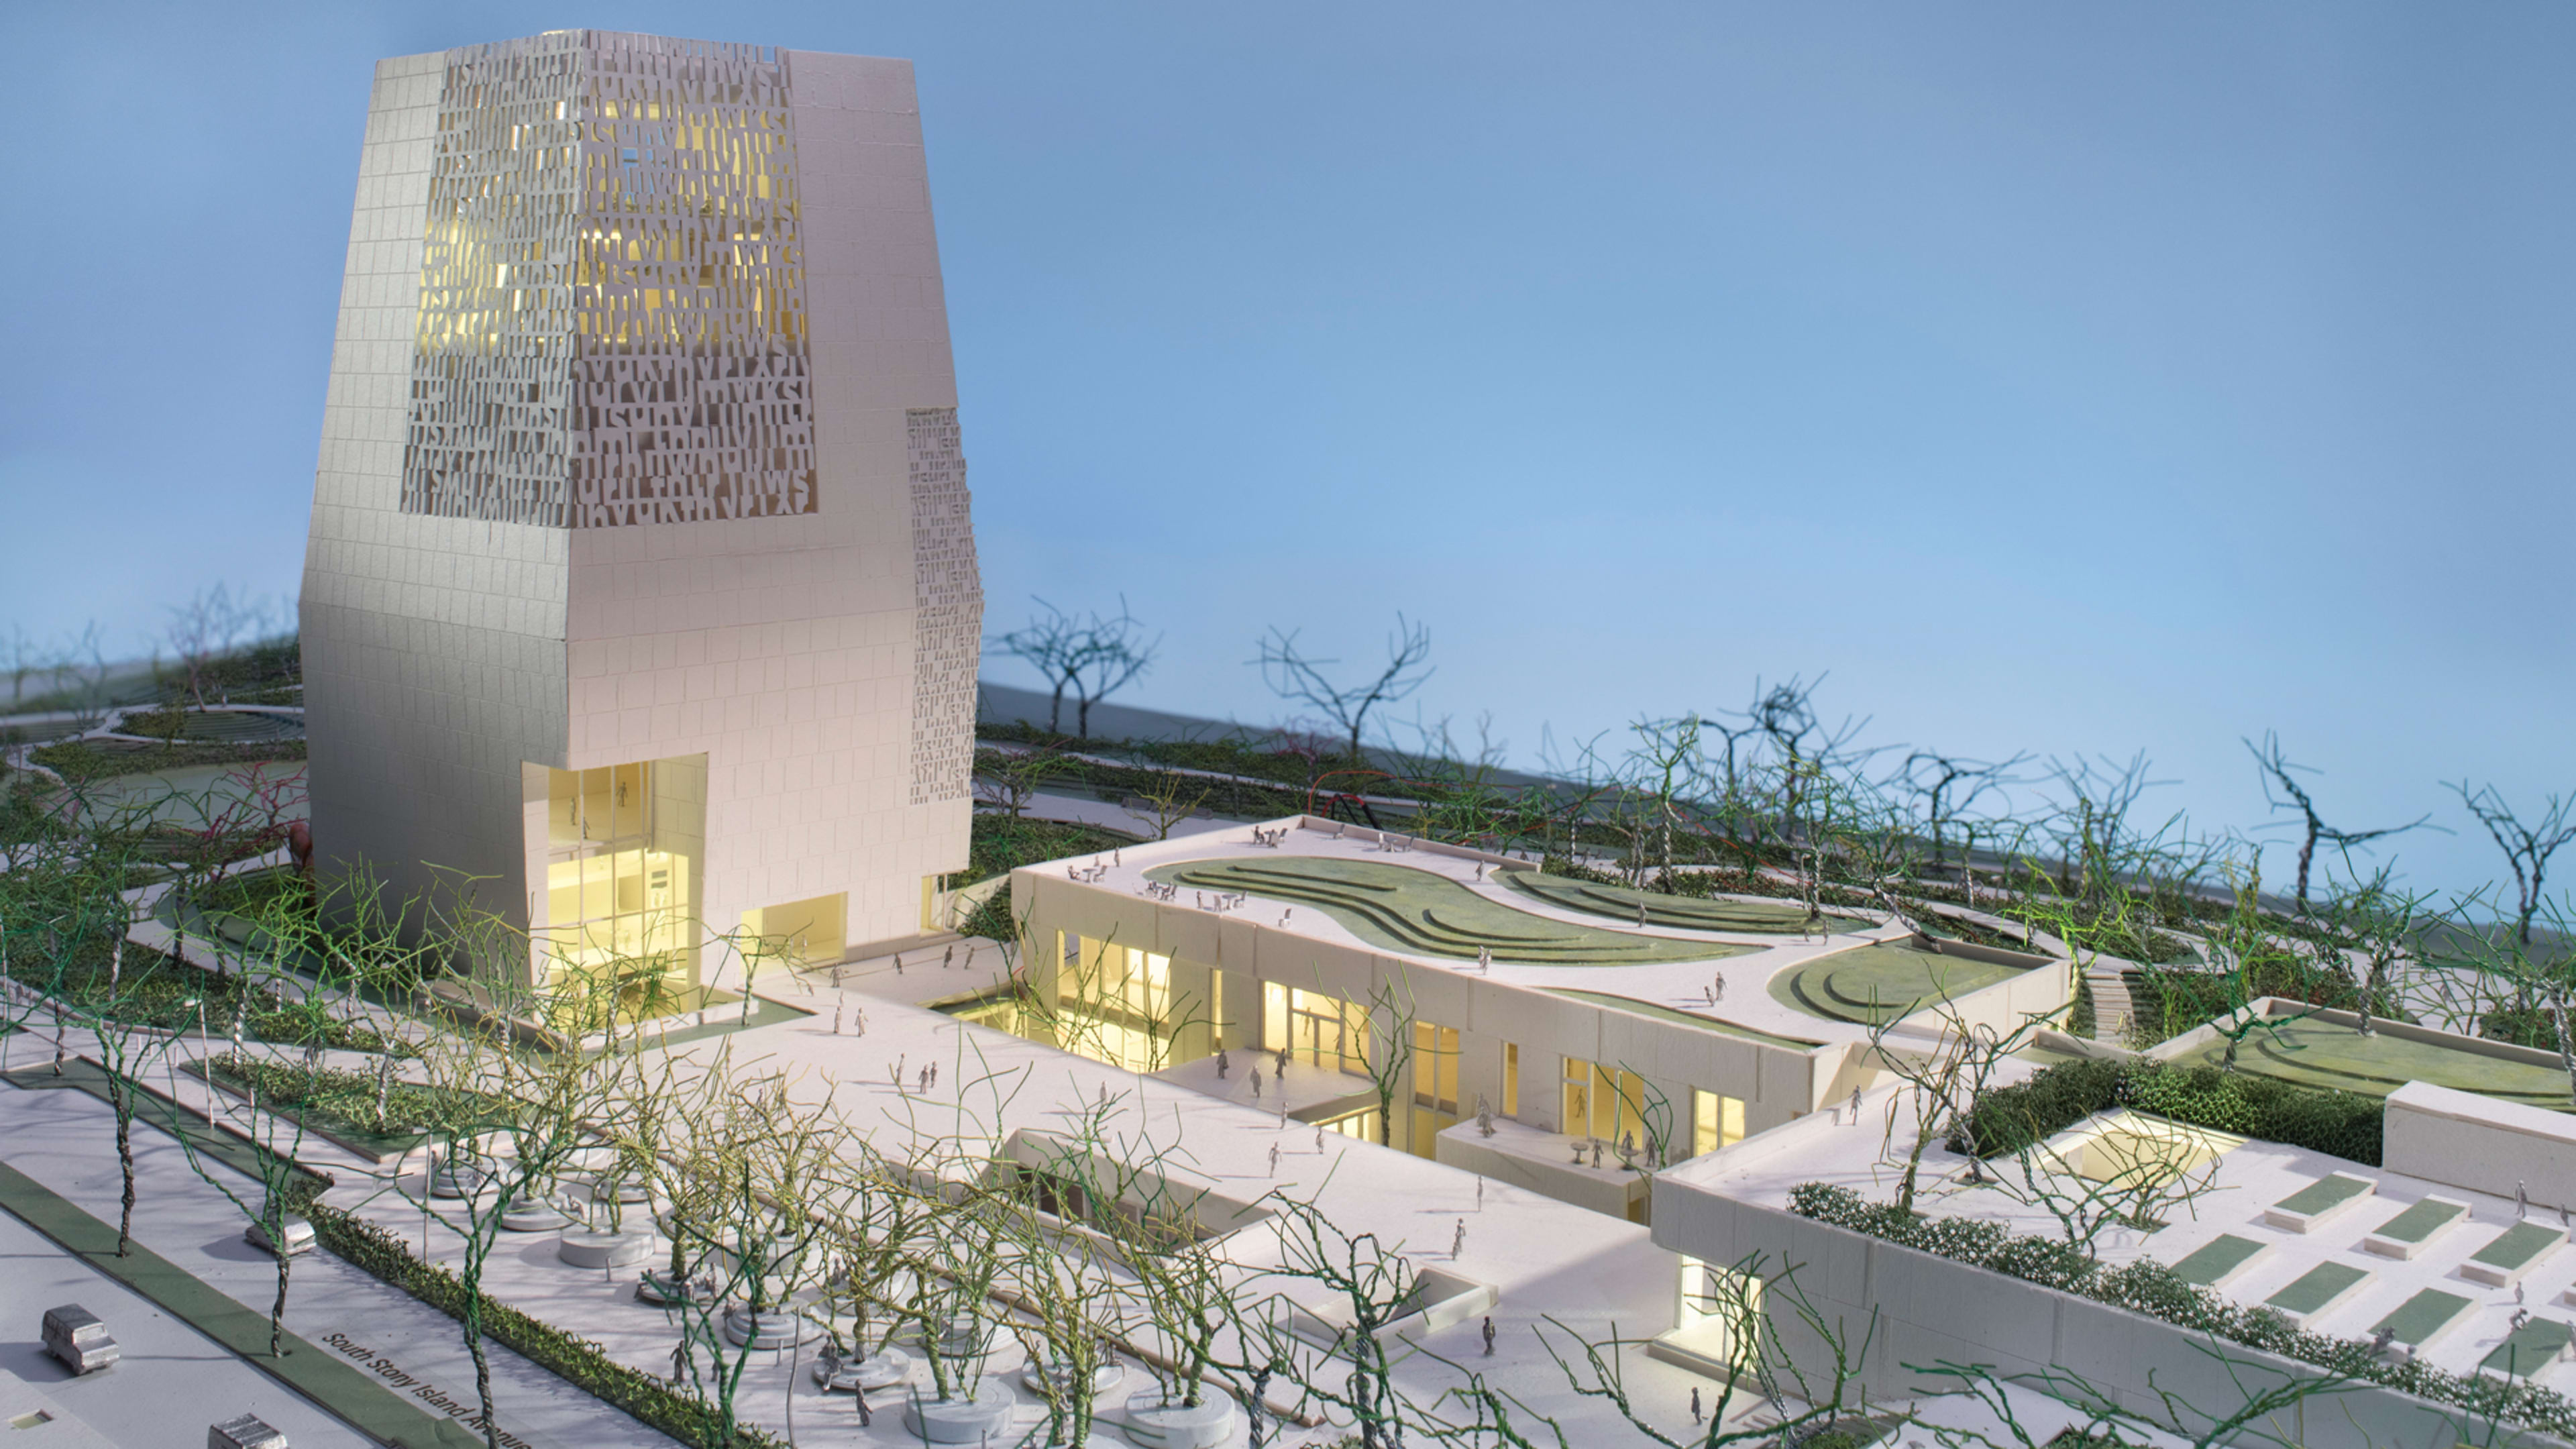 Barack Obama gives us a new twist on the presidential library